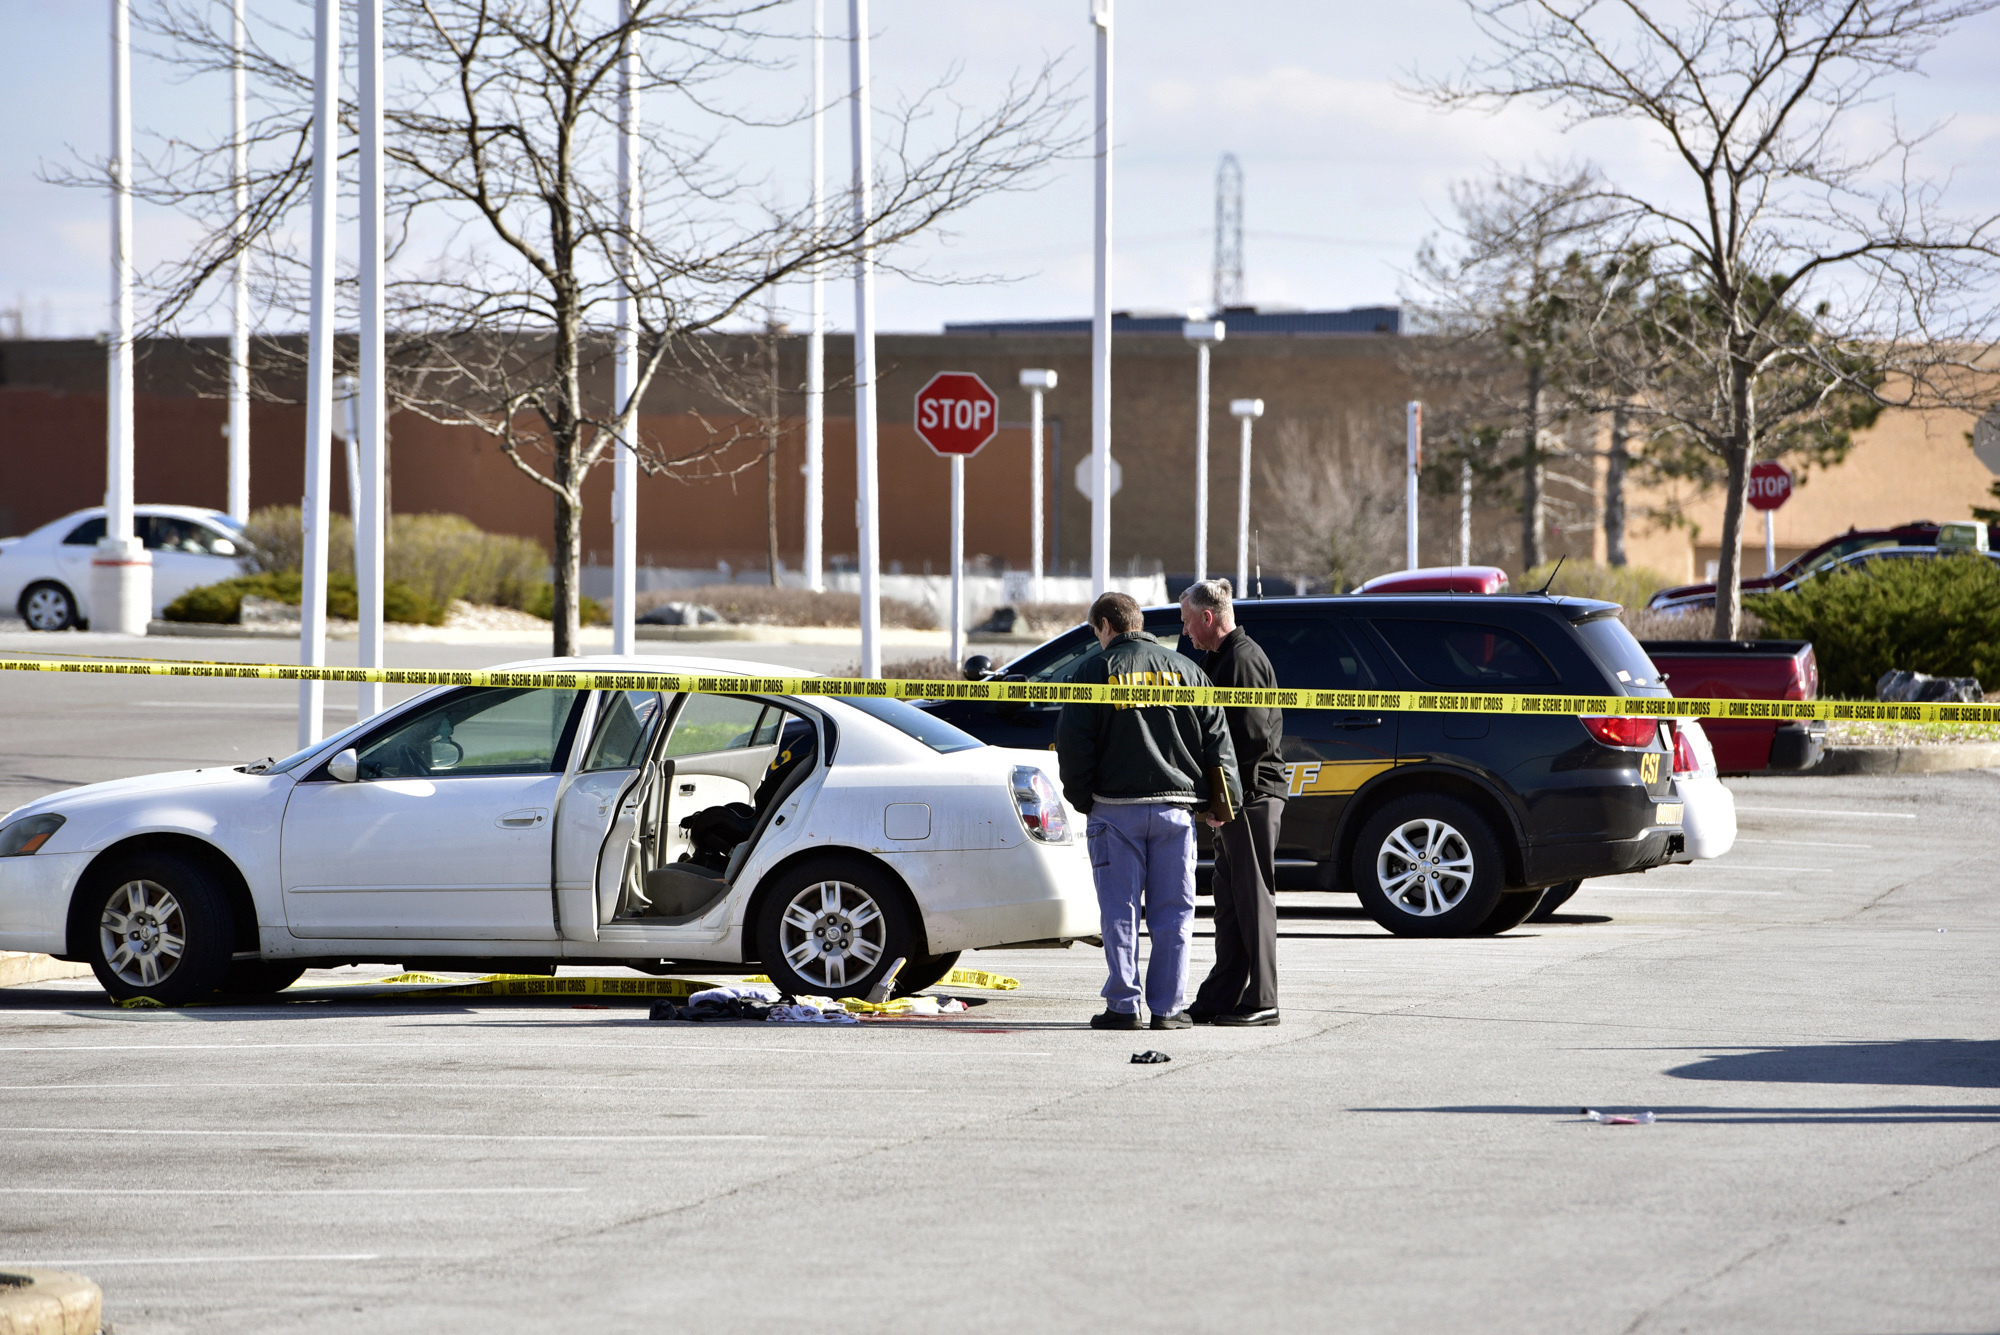 PHOTO: Police work the scene where a 3-year-old girl accidentally shot and wounded her pregnant mother in a car parked outside a northwestern Indiana thrift store, April 18, 2017.